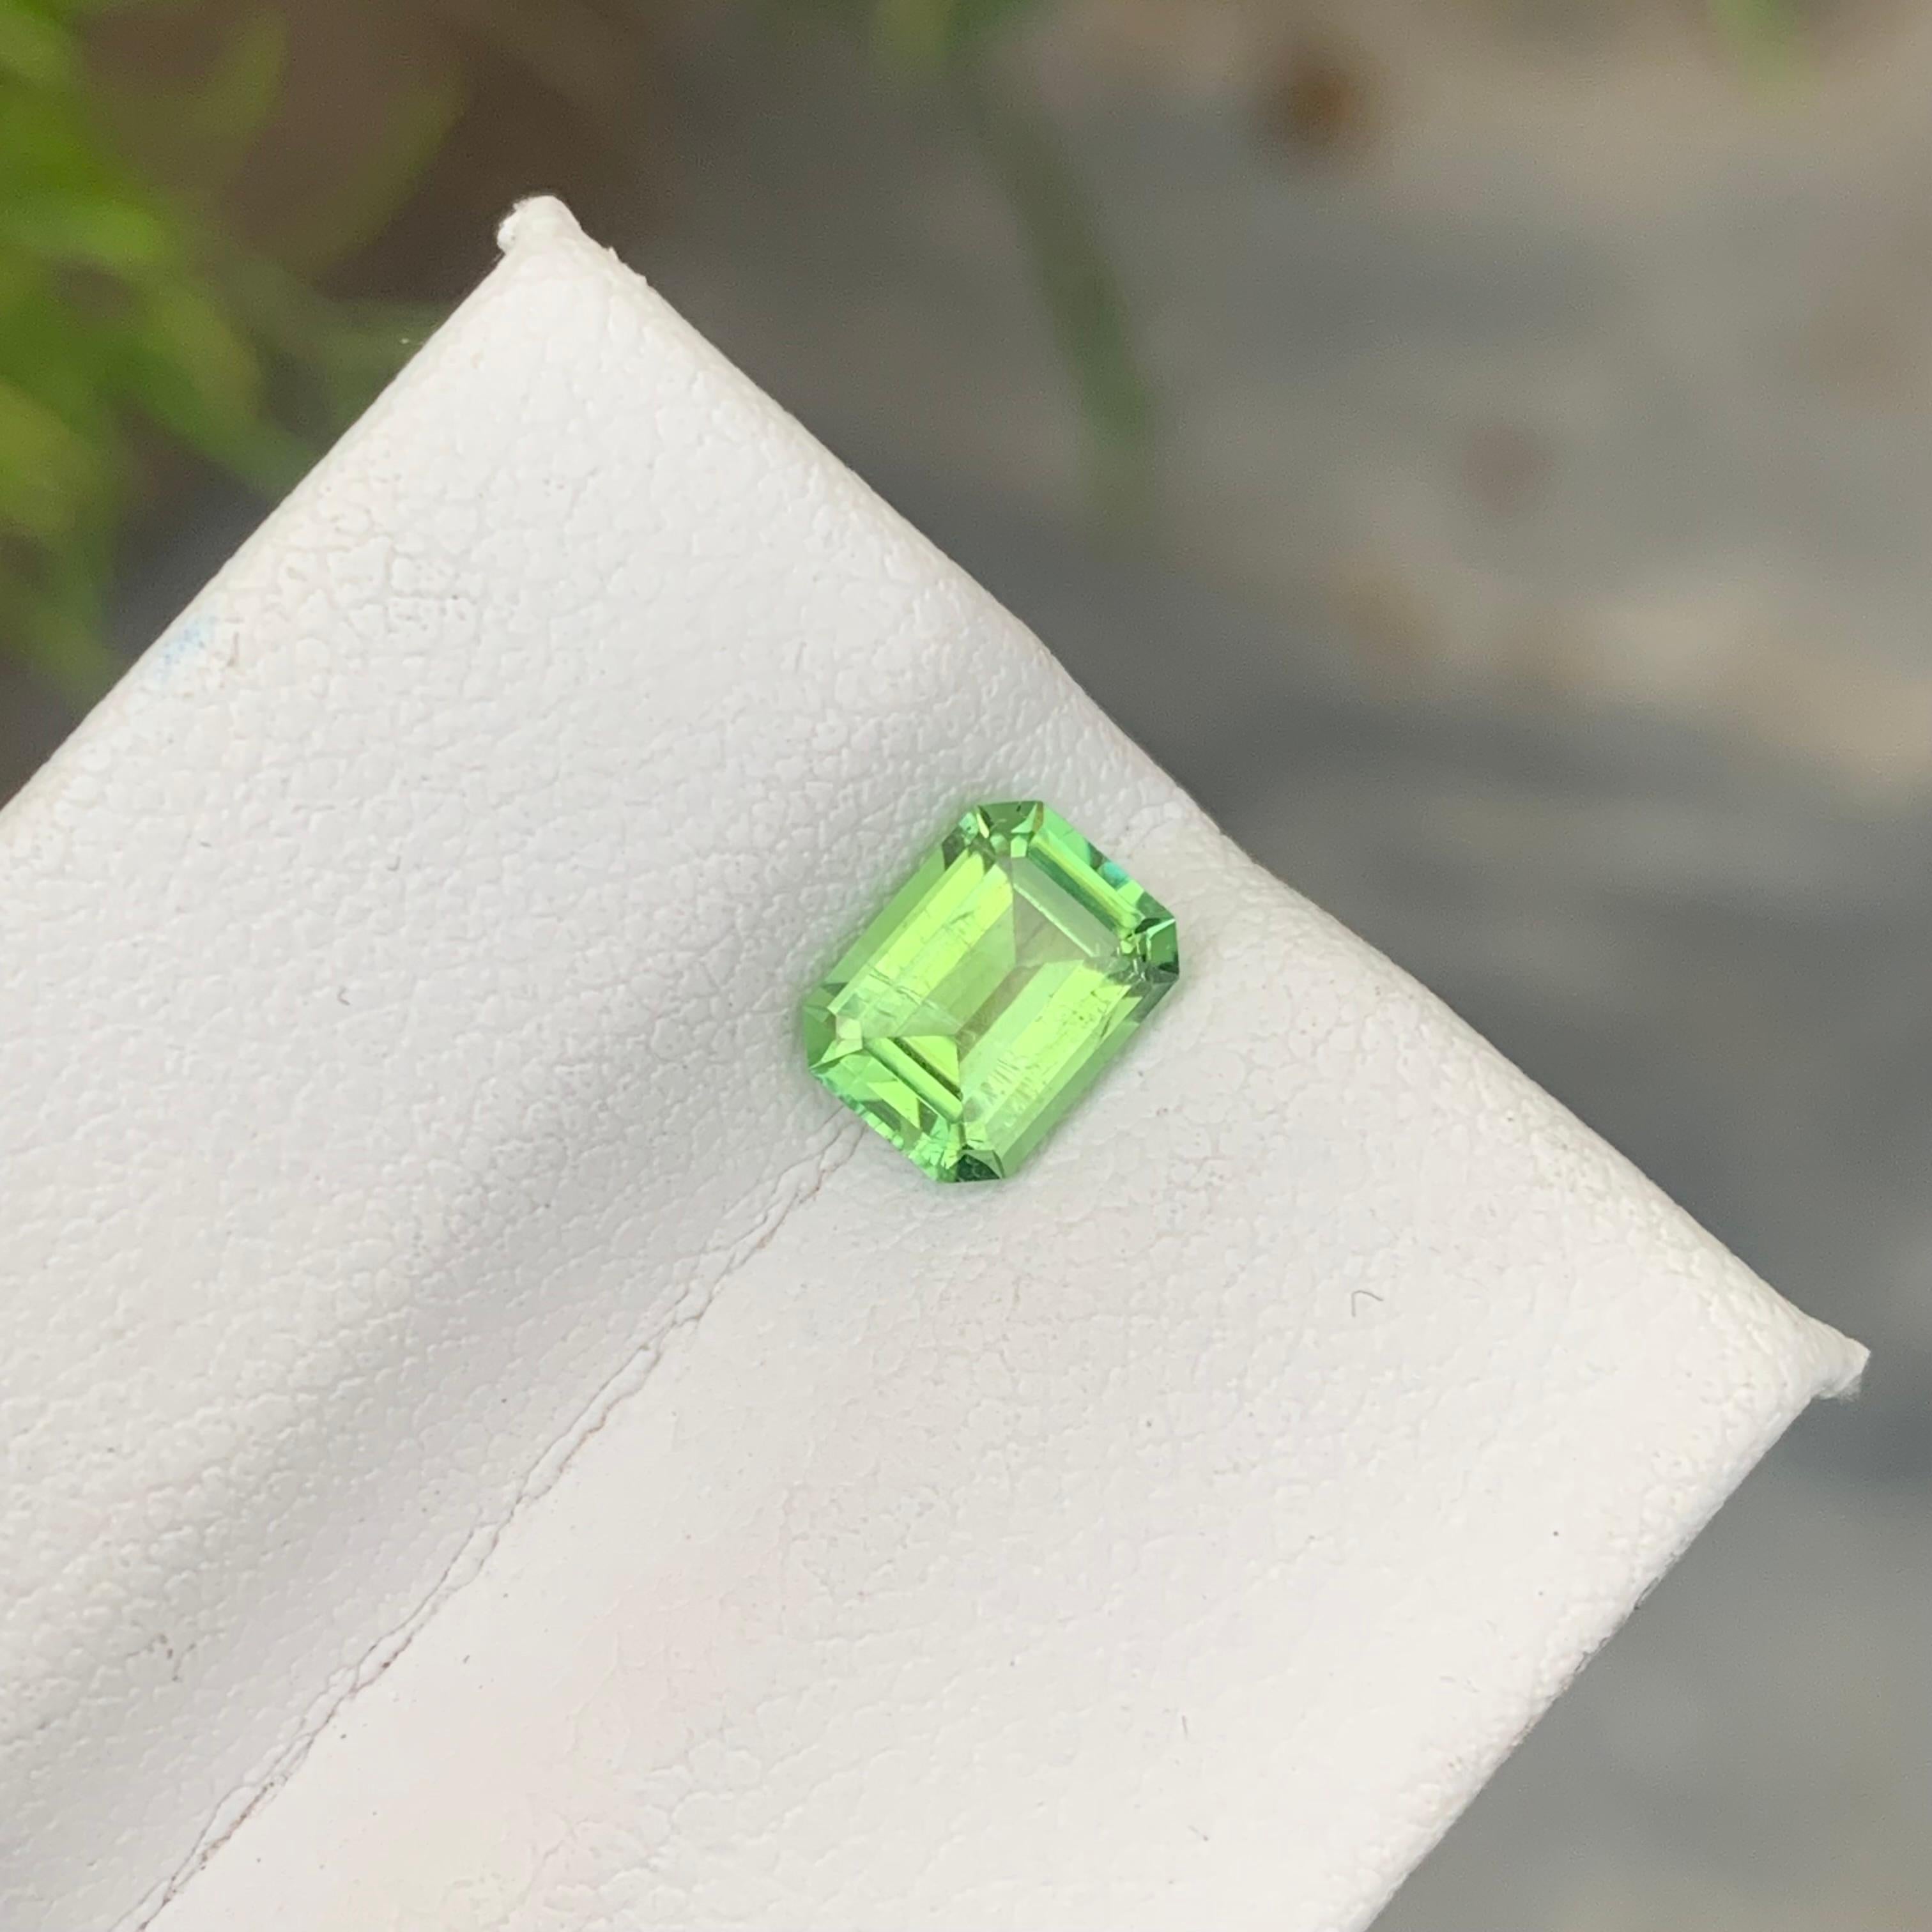 0.95 Carat Natural Loose Green Afghani Tourmaline Emerald Cut Gemstone for Ring For Sale 2